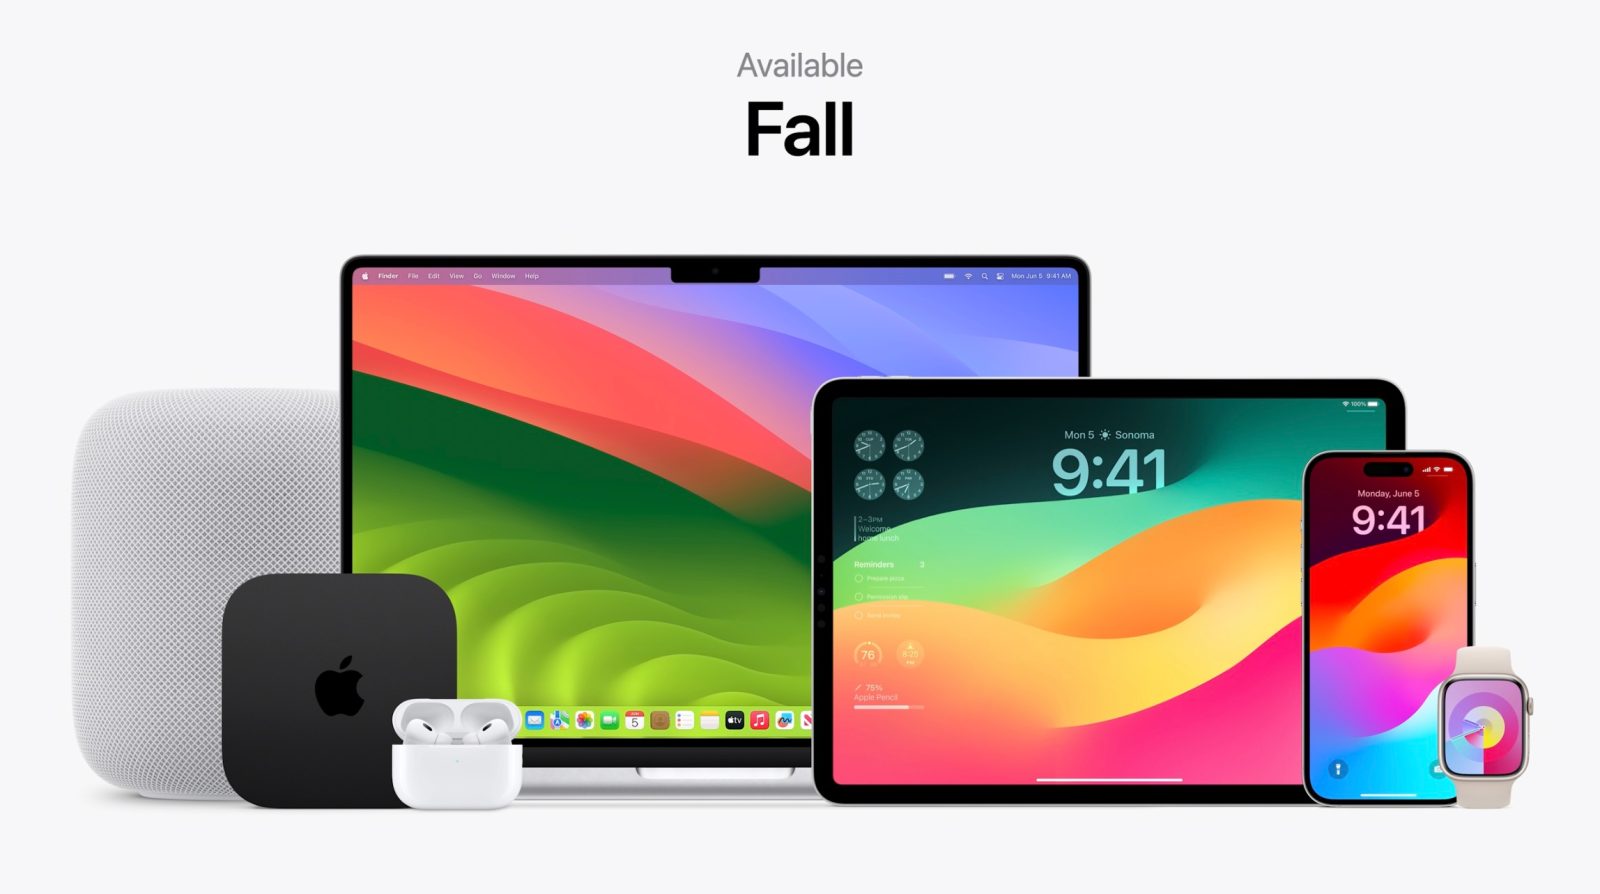 What's new with iOS 17, iPadOS 17, and macOS 